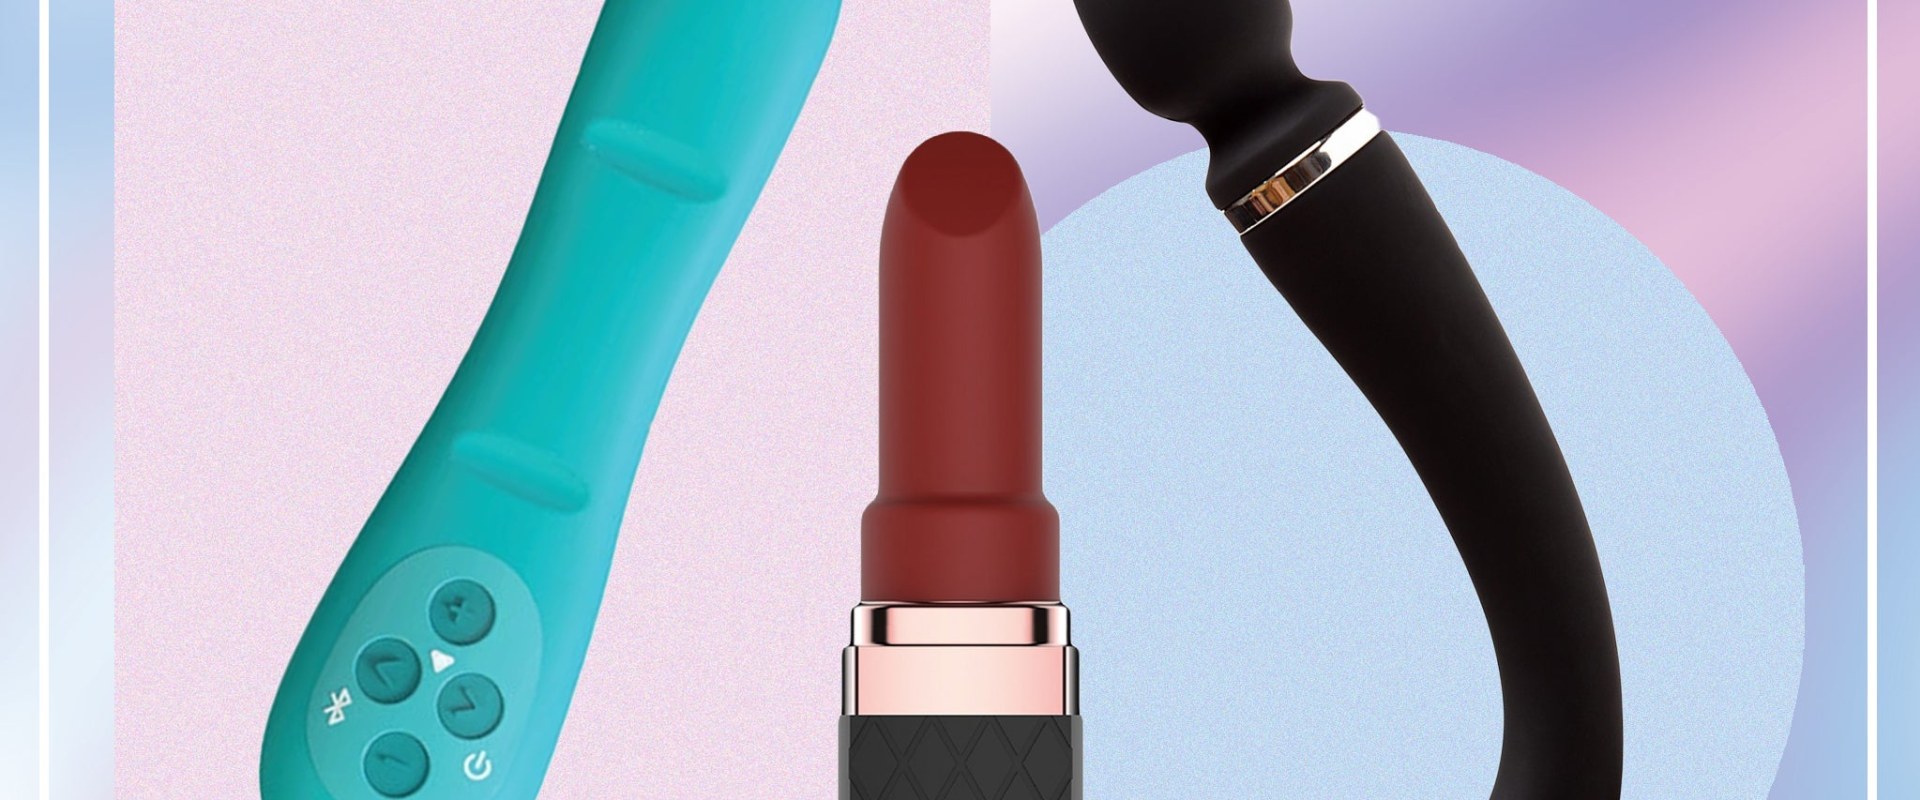 A Comprehensive Look at Vibrators and Their Customer Reviews